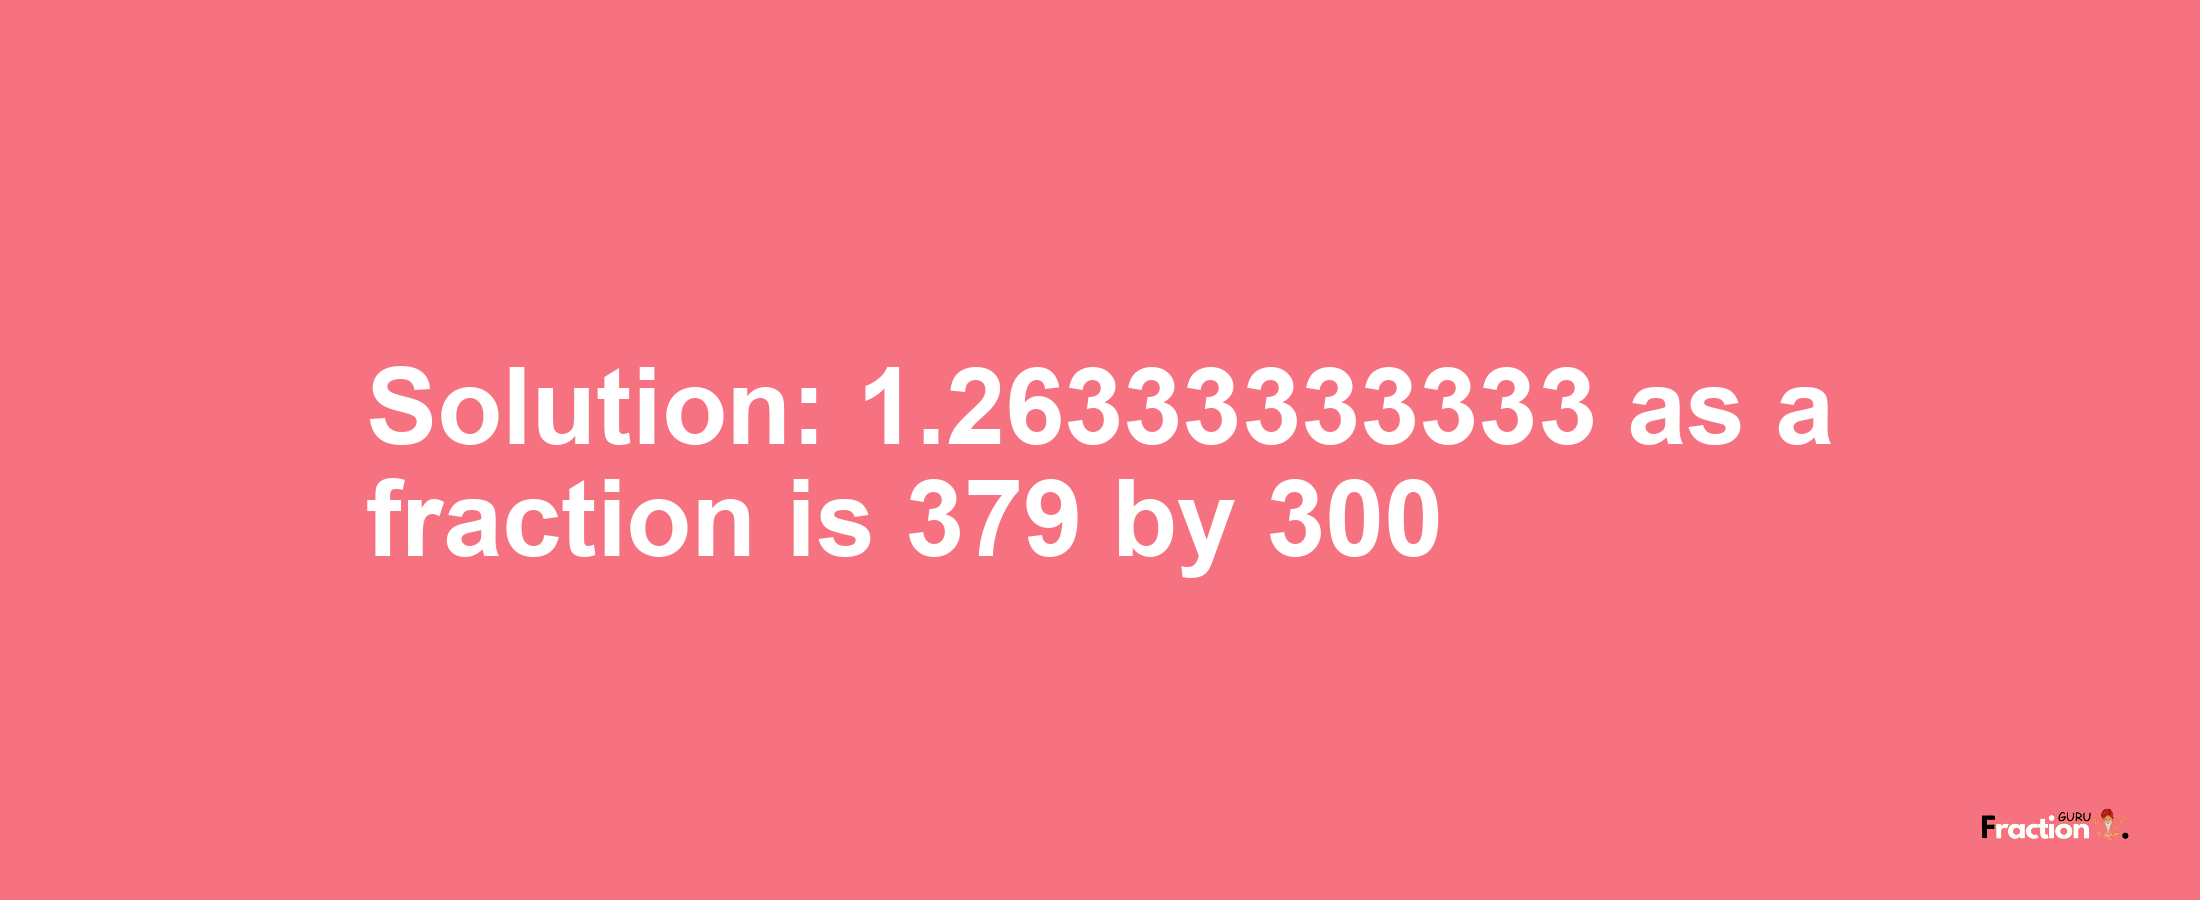 Solution:1.26333333333 as a fraction is 379/300